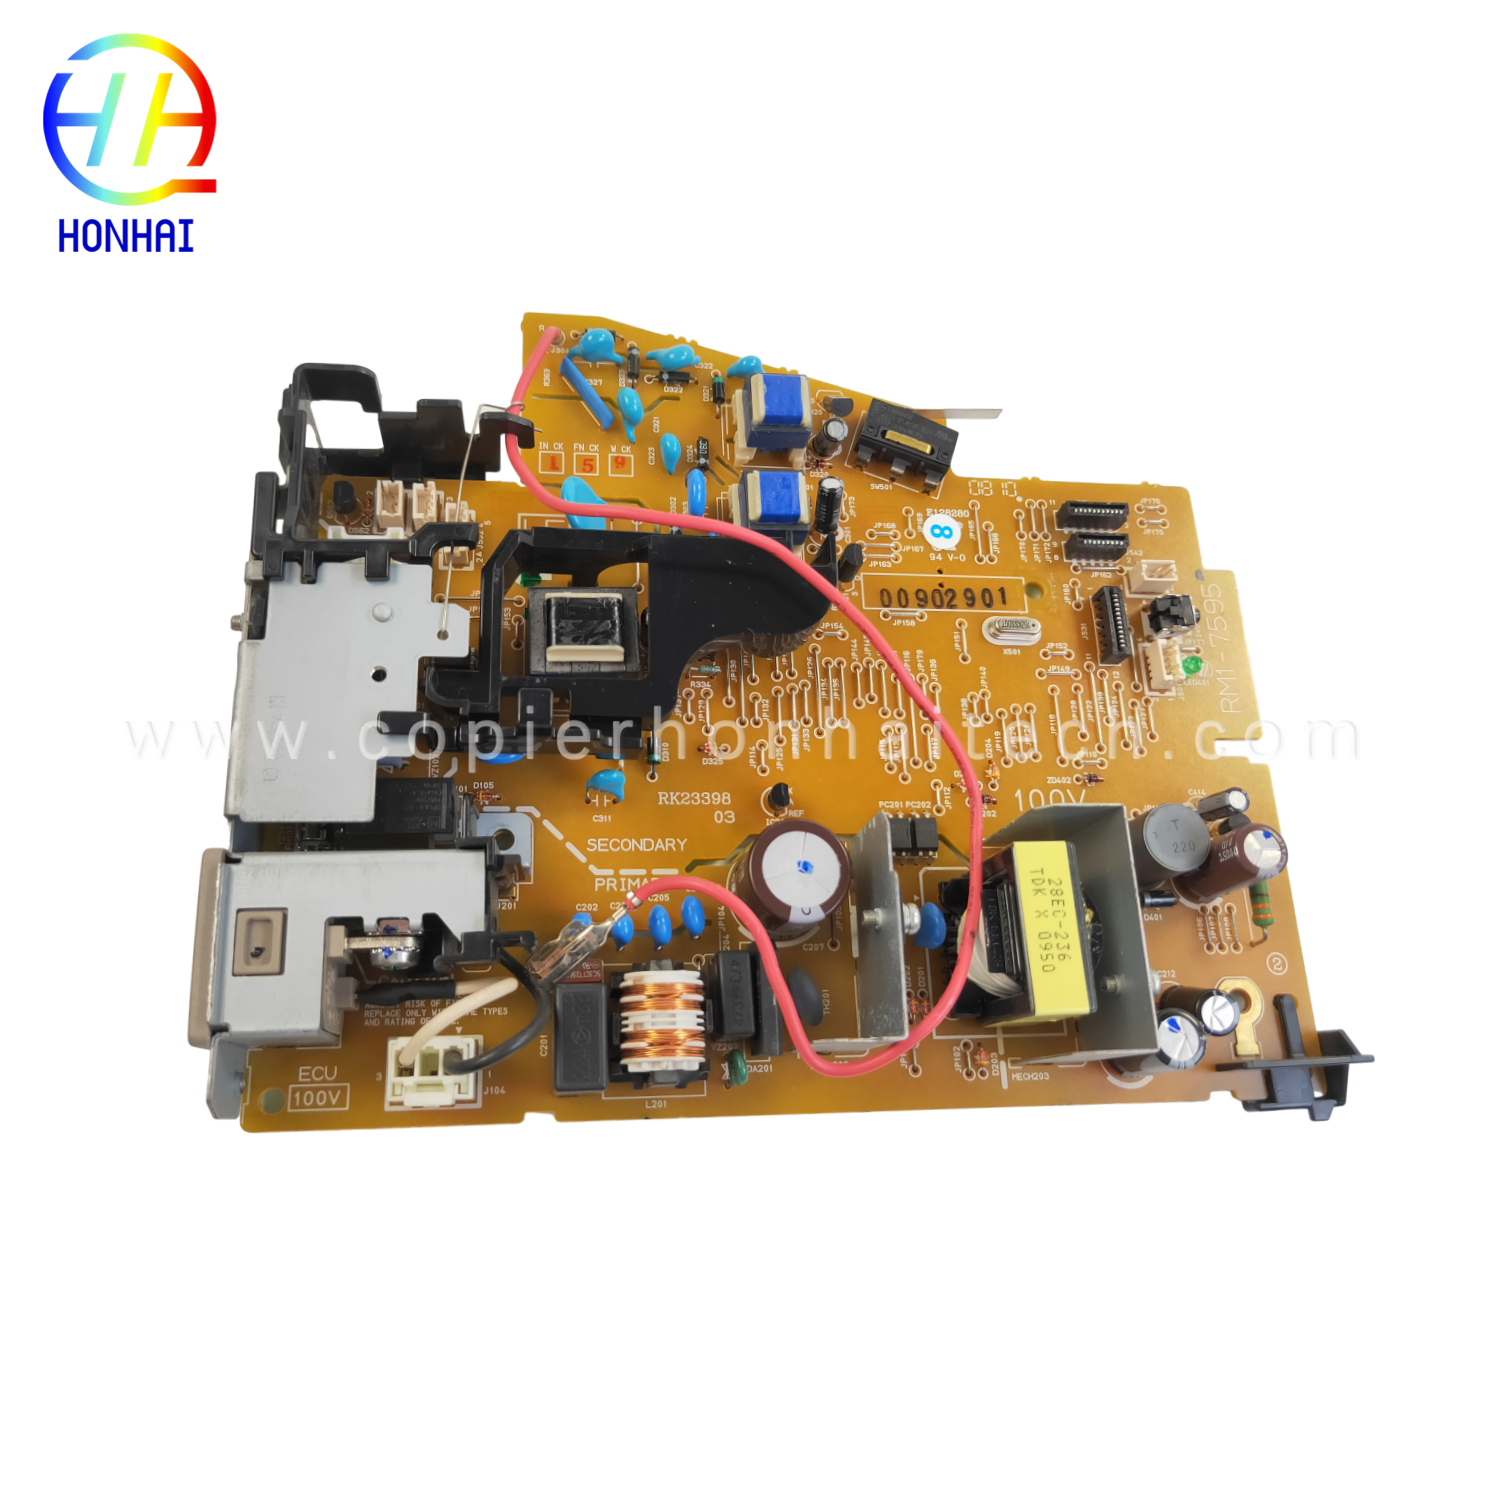 Power Supply Board 110V Original 95% new for HP P1102W RM1-7595 Engine Control Power Board